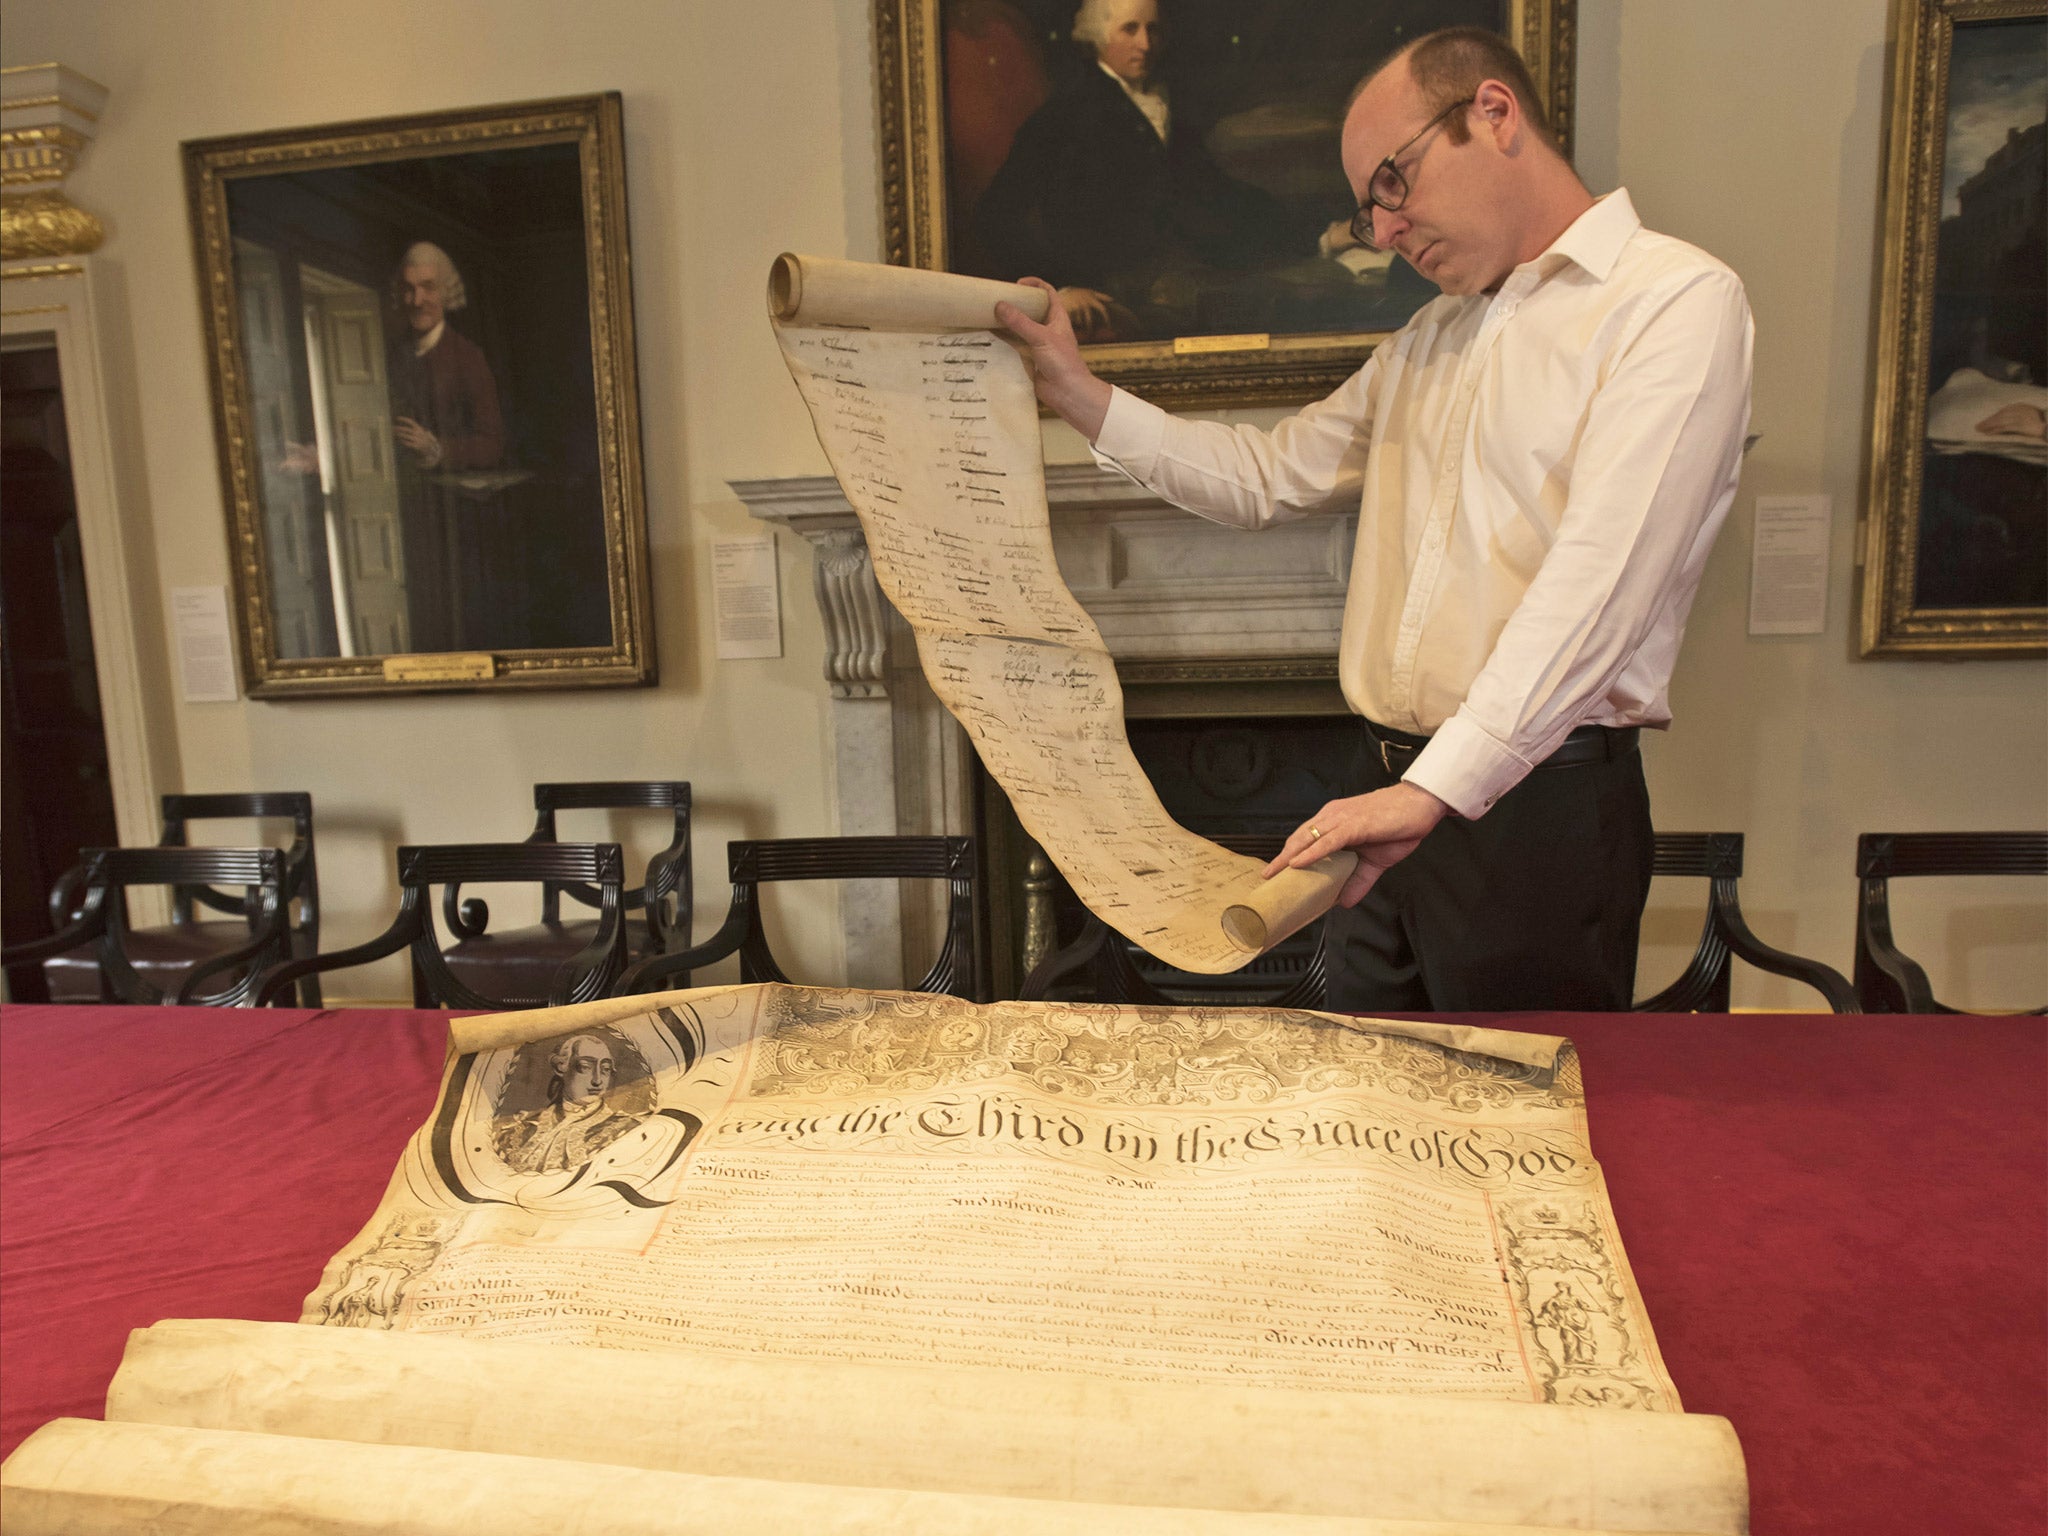 The missing charter has been rediscovered at the Royal Academy after 250 years